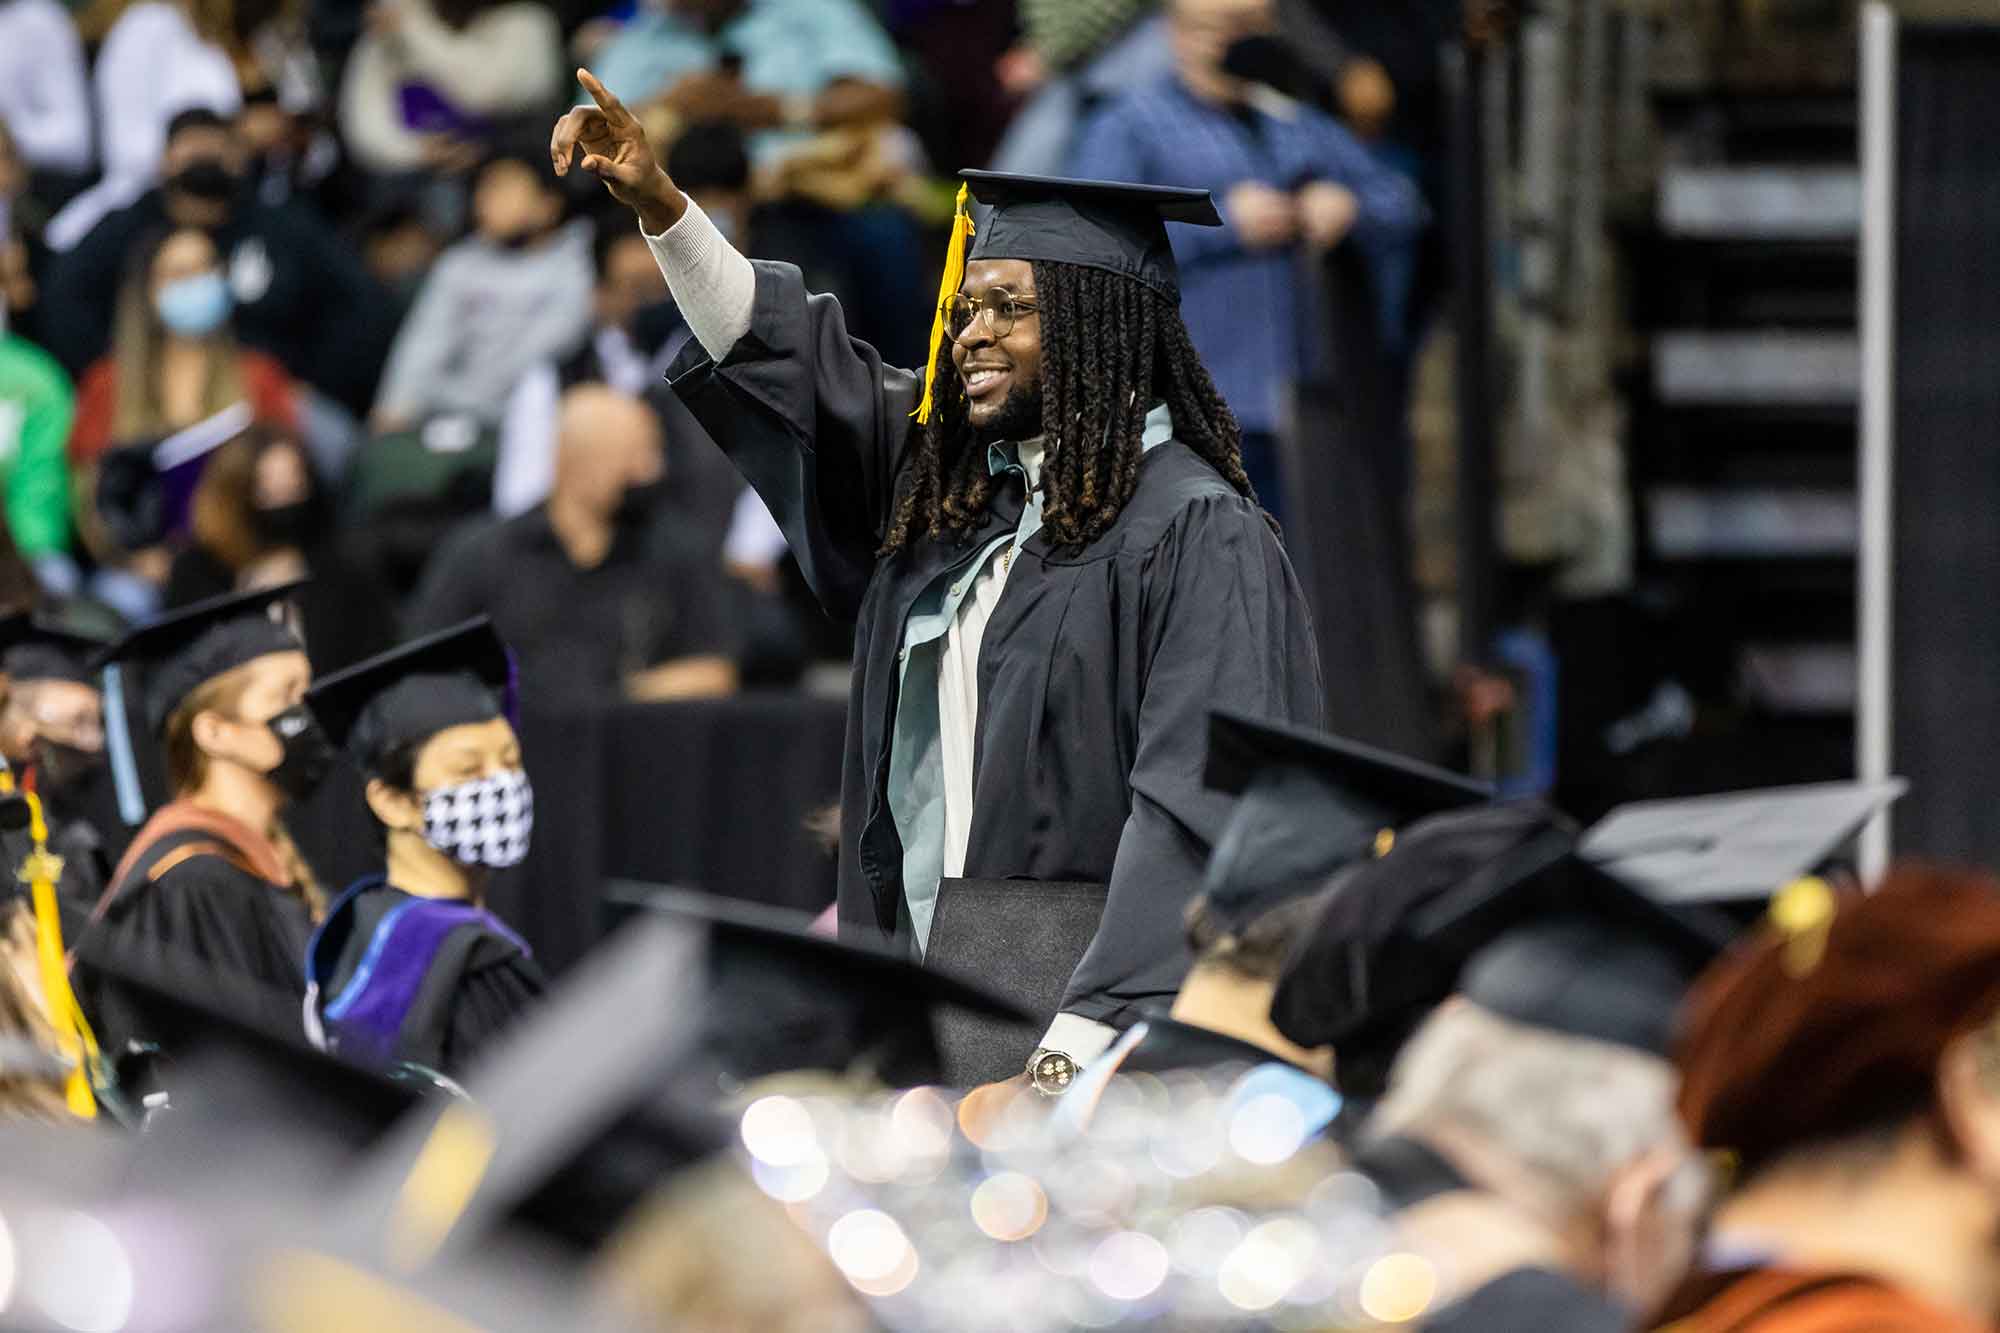 An ACC student celebrates during Fall 2021 commencement ceremony